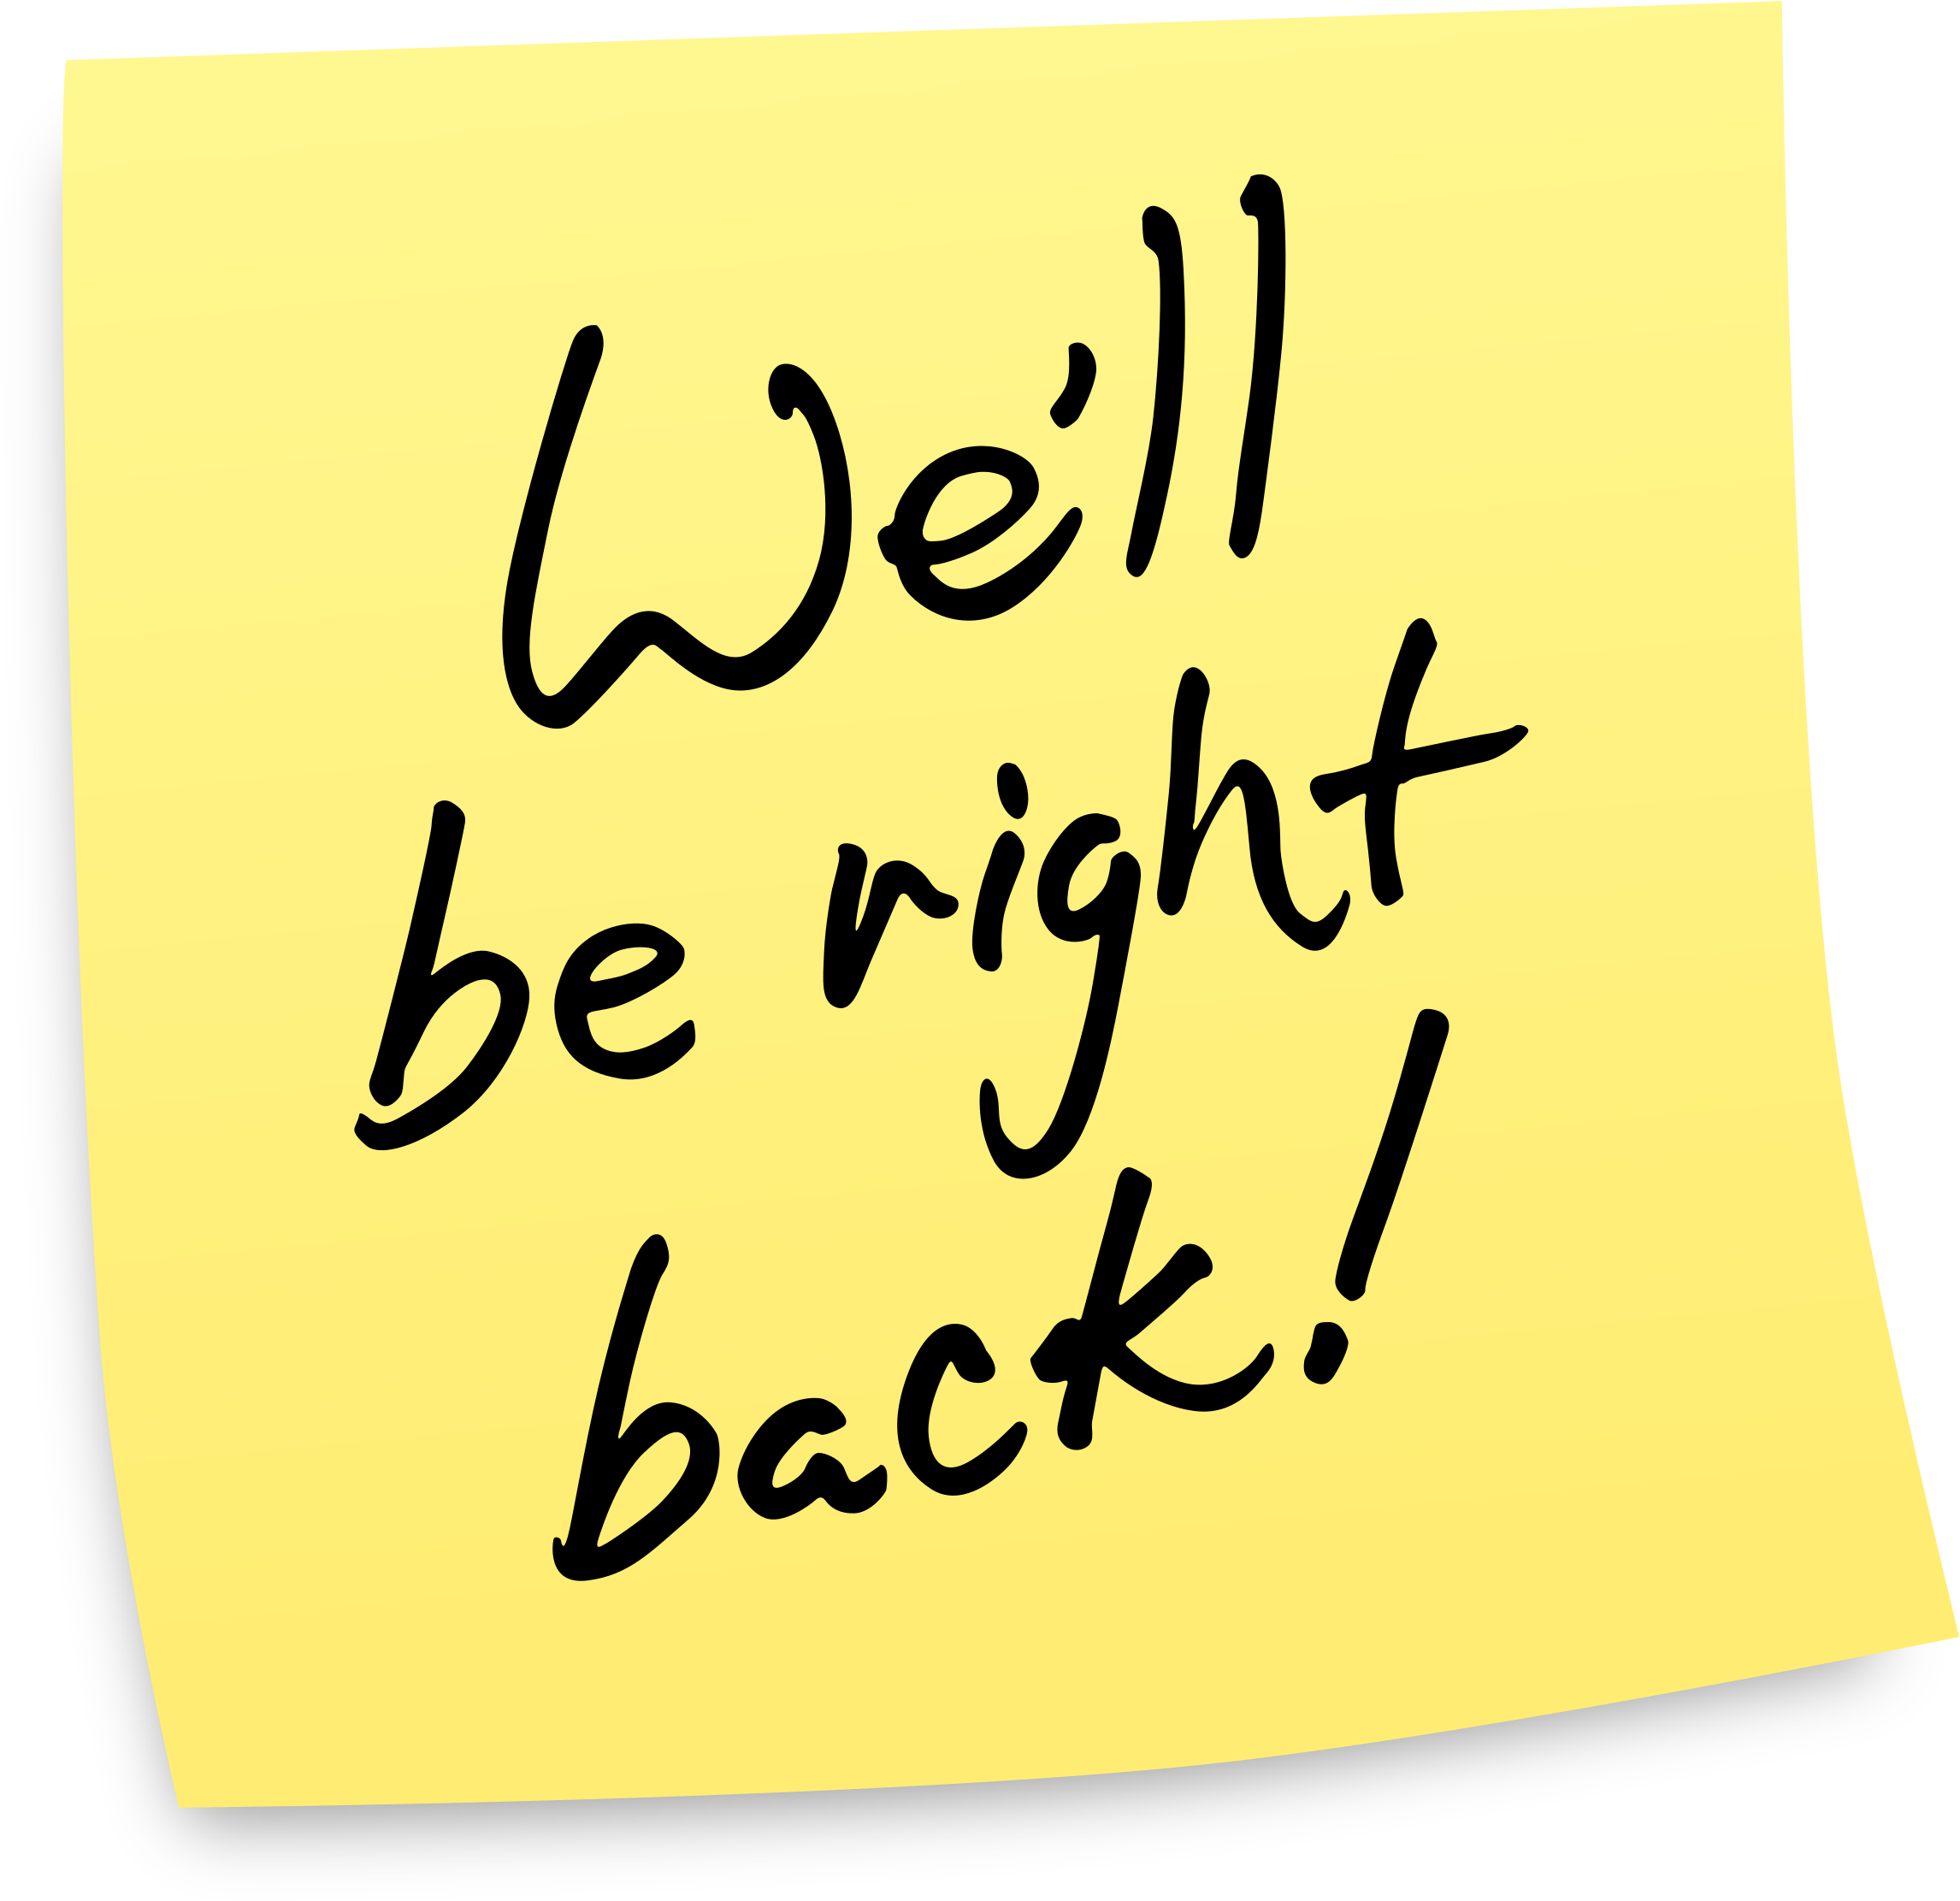 A Yellow Post-it Note With Black Text